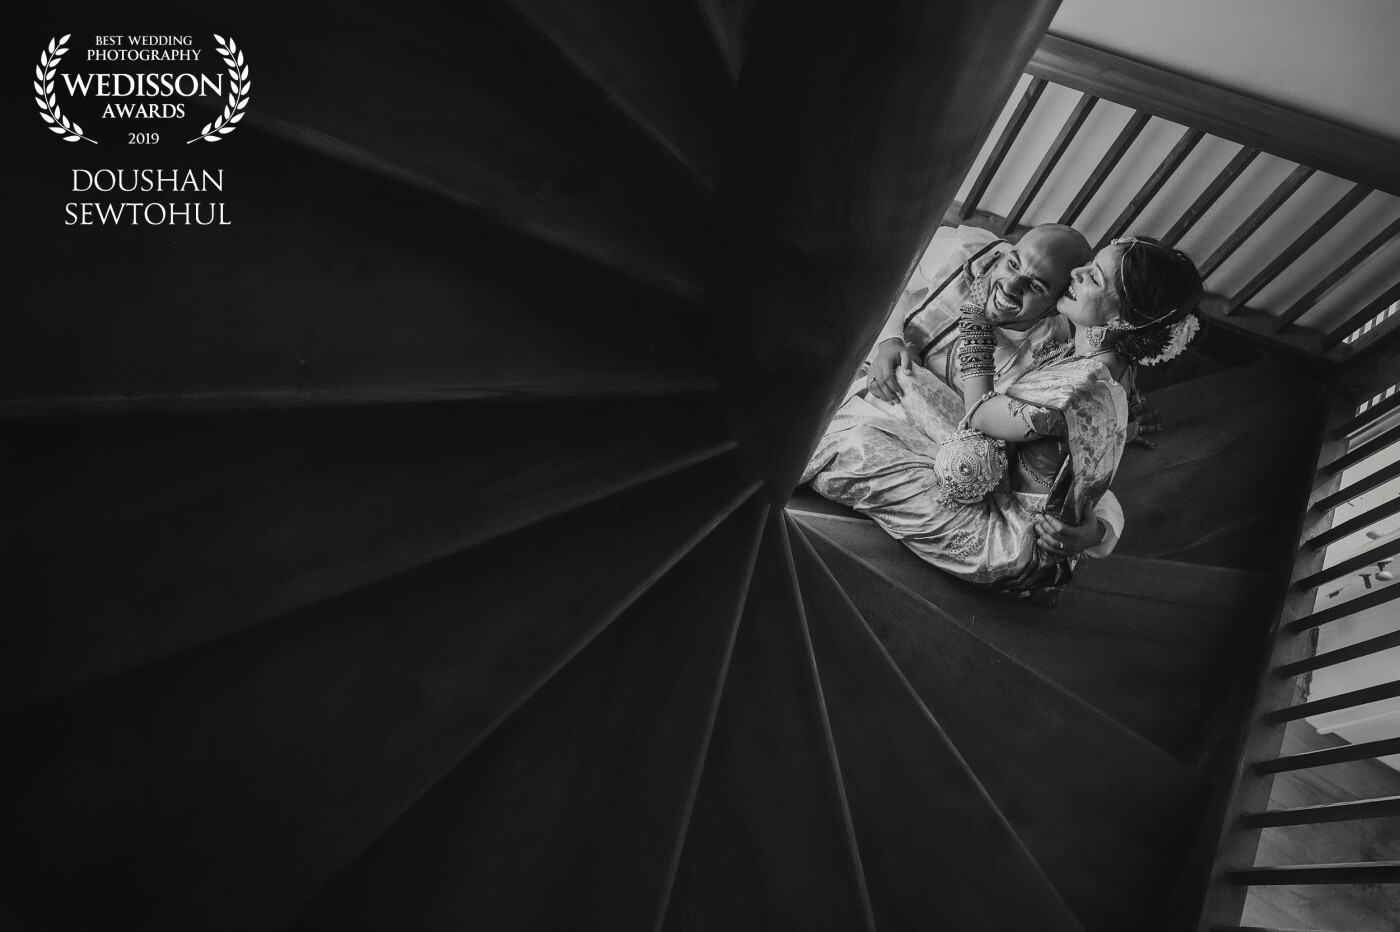 It was an empty palace. While walking around I came across this stair with beautiful lines and perspectives. I did not want the couple to focus on the camera. I wanted them to be together enjoying a casual chat moment. Yovan & Anouchka nailed it perfectly.